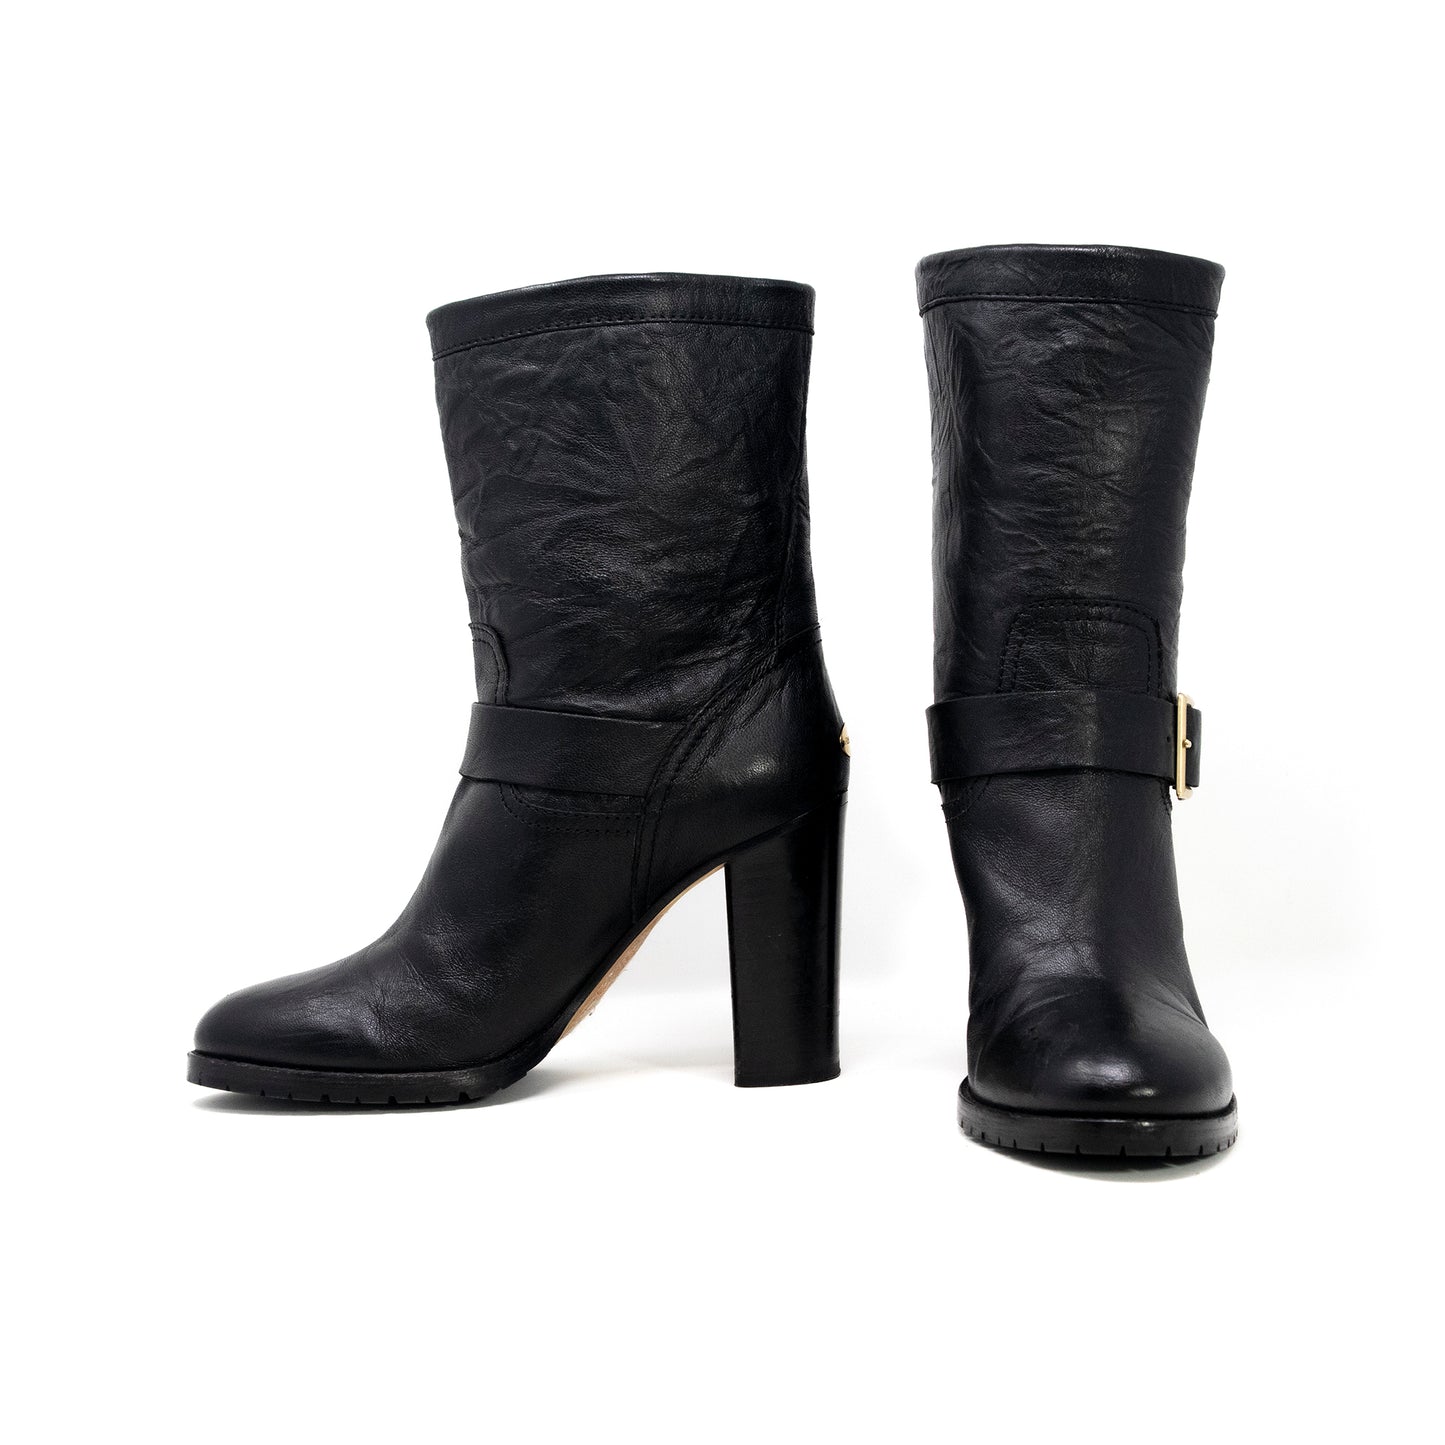 Jimmy Choo Leather Moto Boots - Size 40